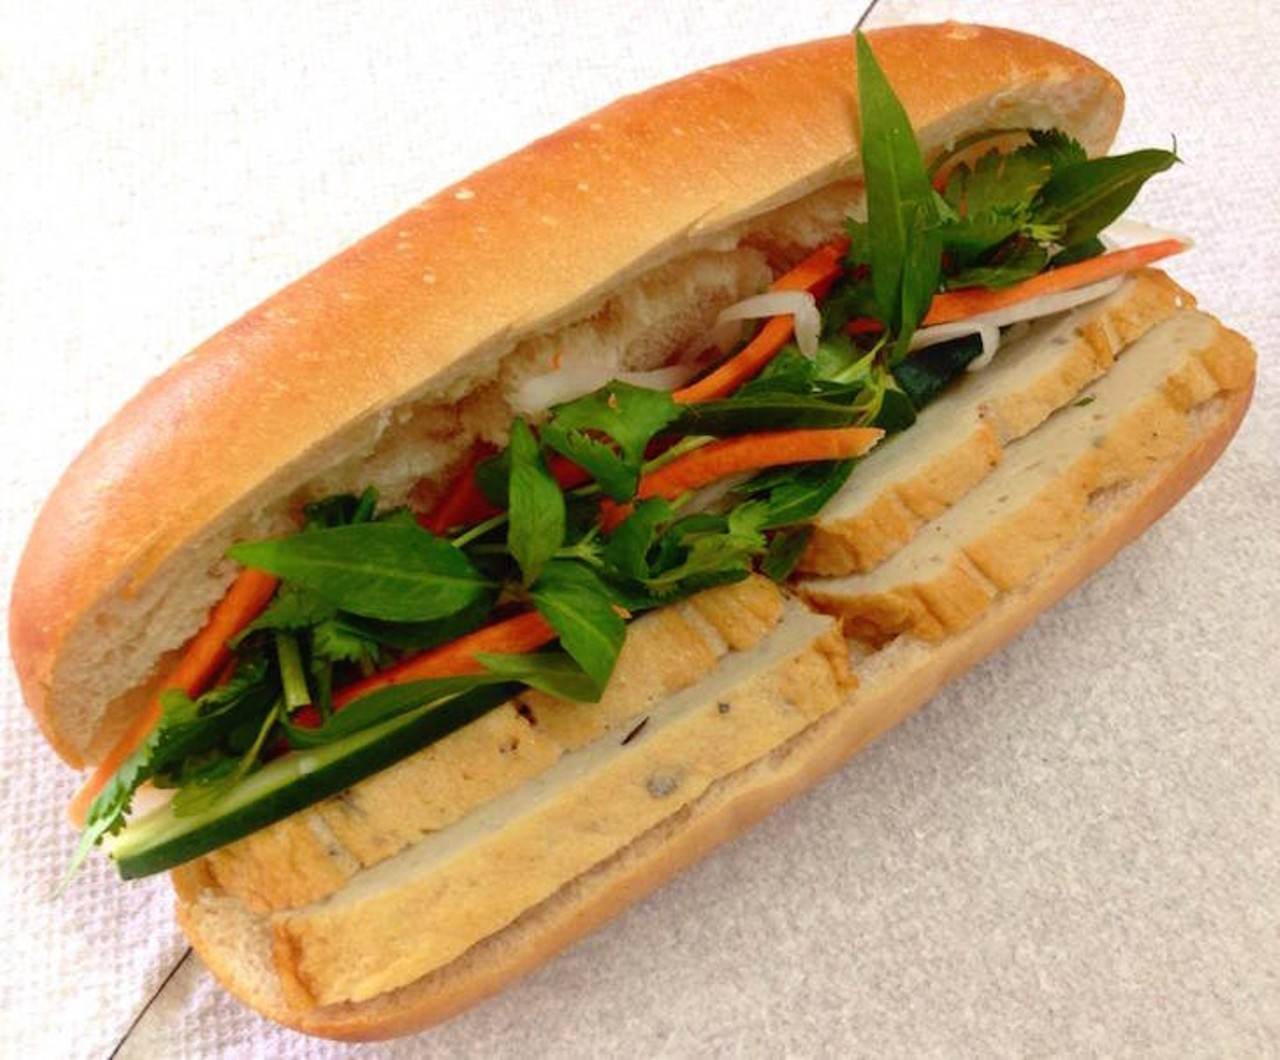 Nha Trang Subs
1216 E. Colonial Drive, 407-346-4549
Some of the best and cheapest banh mi in Mills 50 are found here &#150; super crisp baguettes make the difference, but the $3.50 to $4.50 price range doesn't hurt, either. Traditionalists won't go wrong with the dac biet, but step out and try the fried fish paste if you're adventurous. Cash only.
Photo via Nhatrang Subs/Facebook